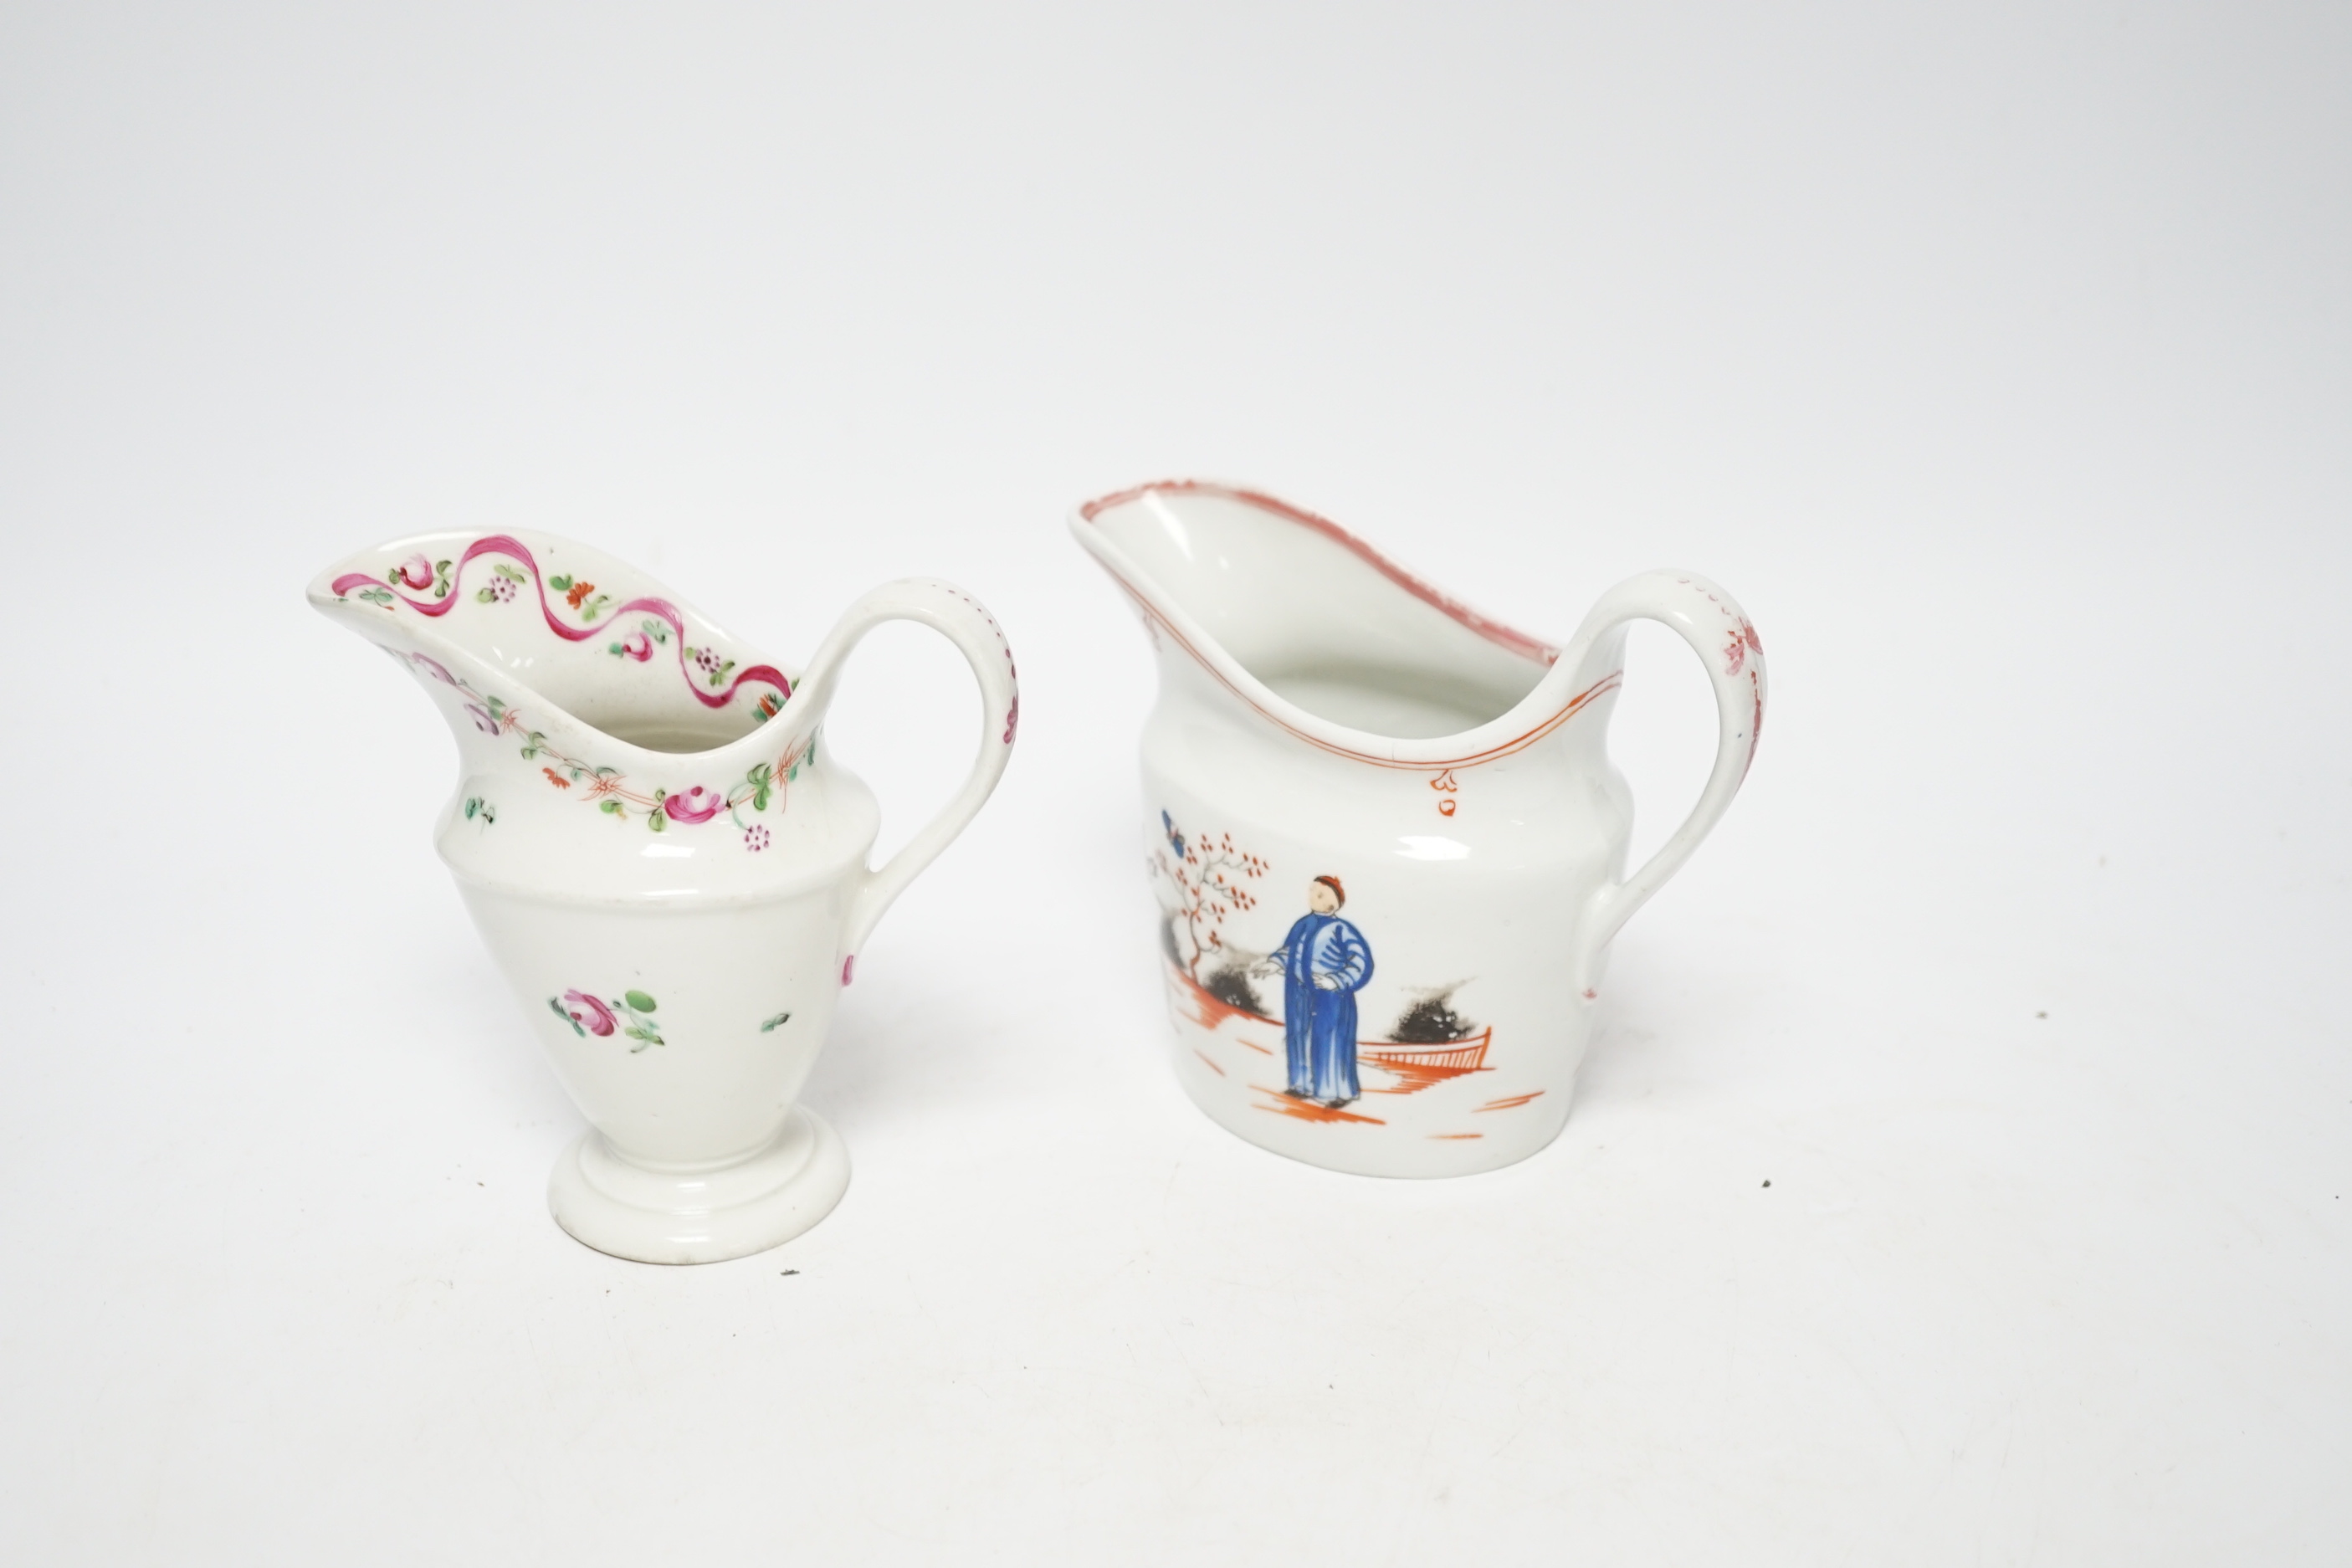 An 18th century Newhall teapot stand and a New Hall milk jug, c.1810 and a Keeley milk jug